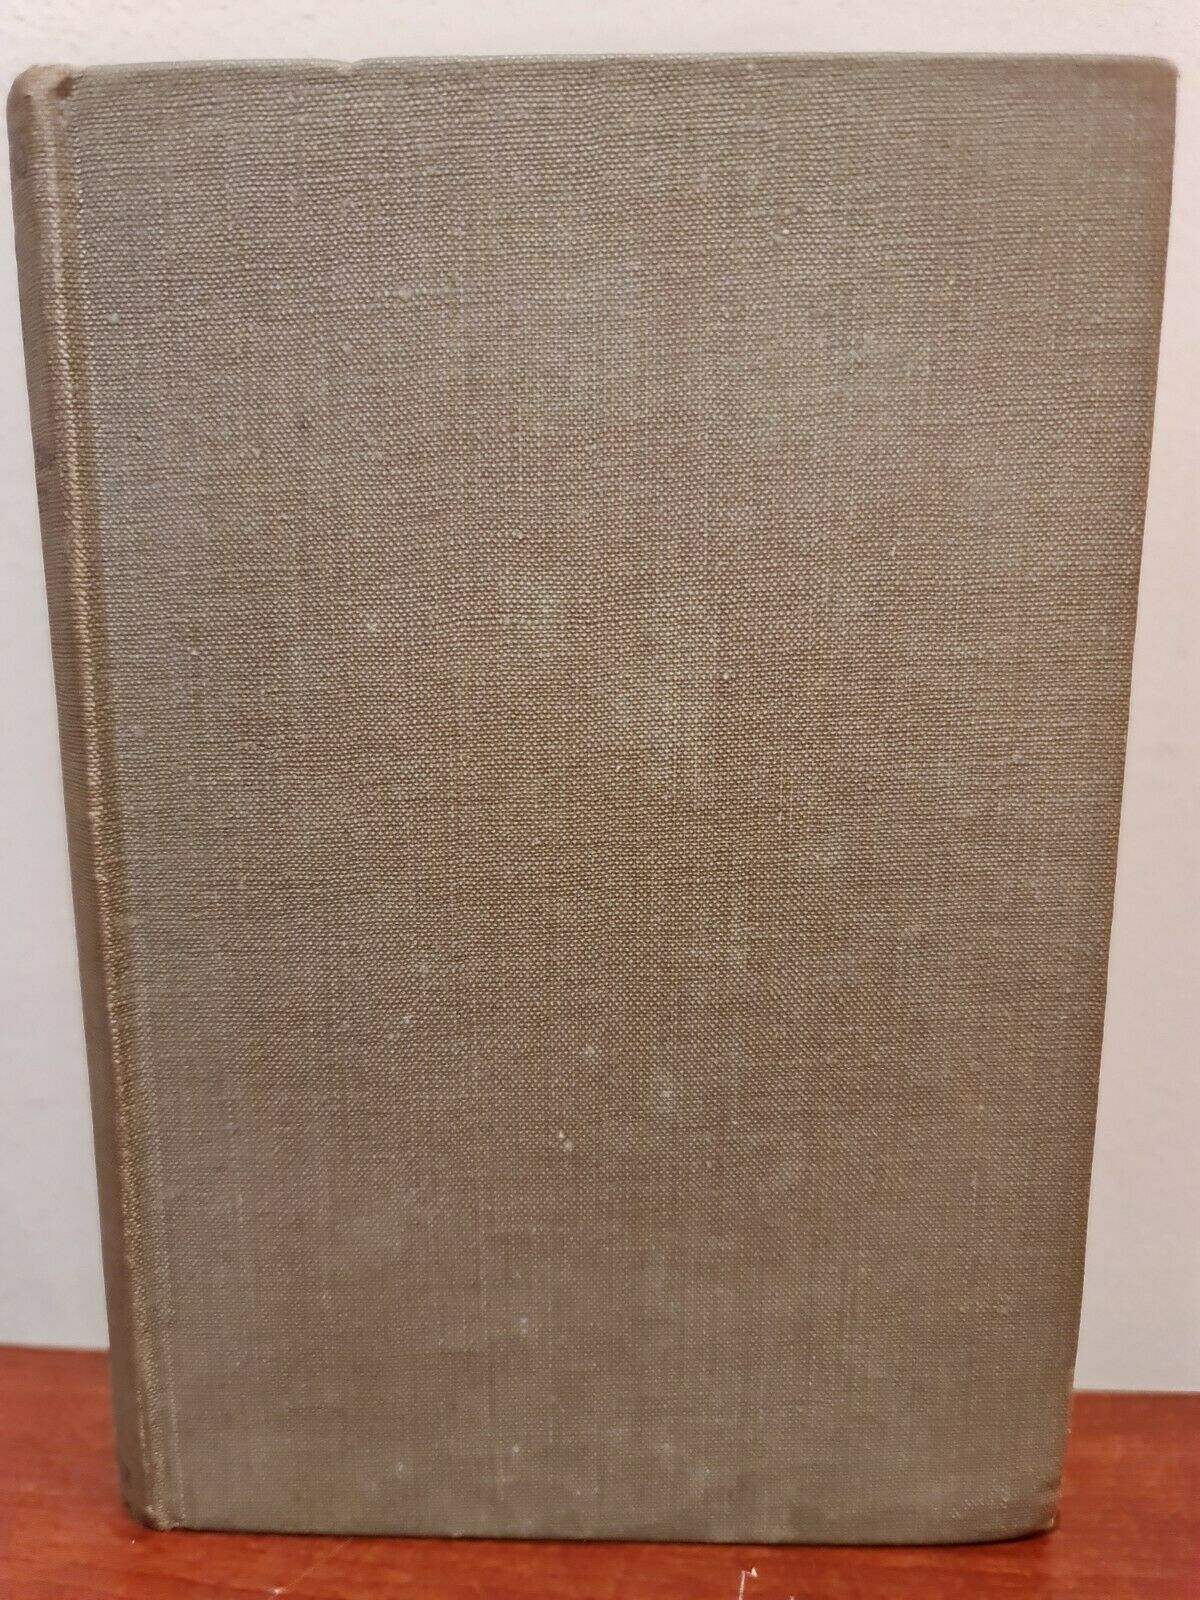 Daughters and Sons by I Compton-Burnett (1950)